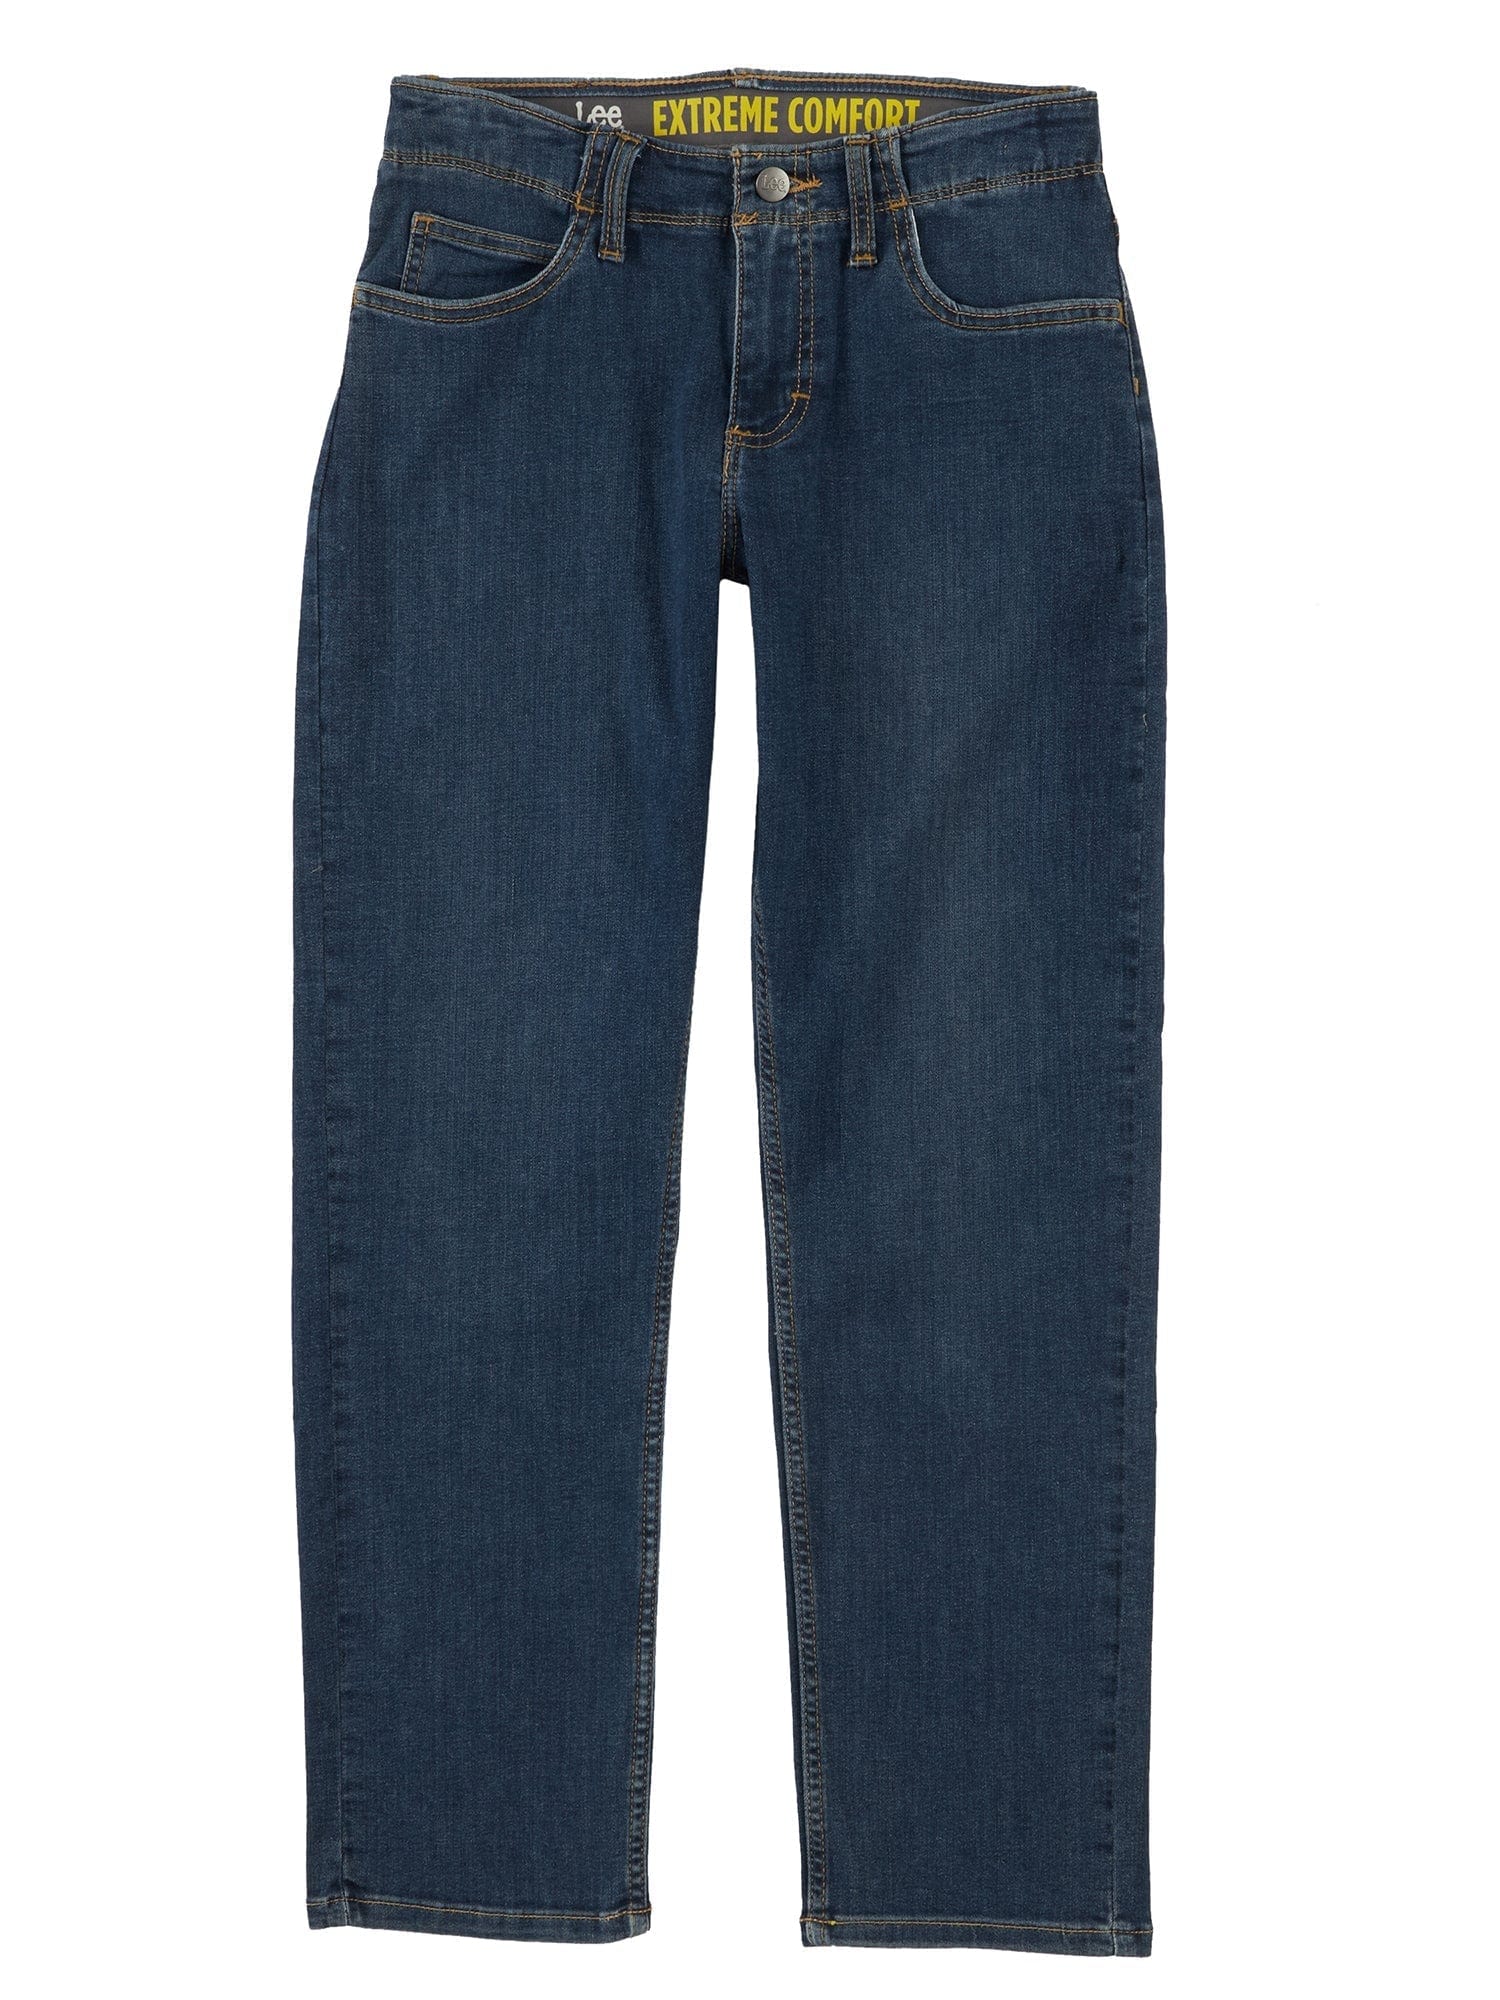 Lee West relaxed fit jean in mid blue